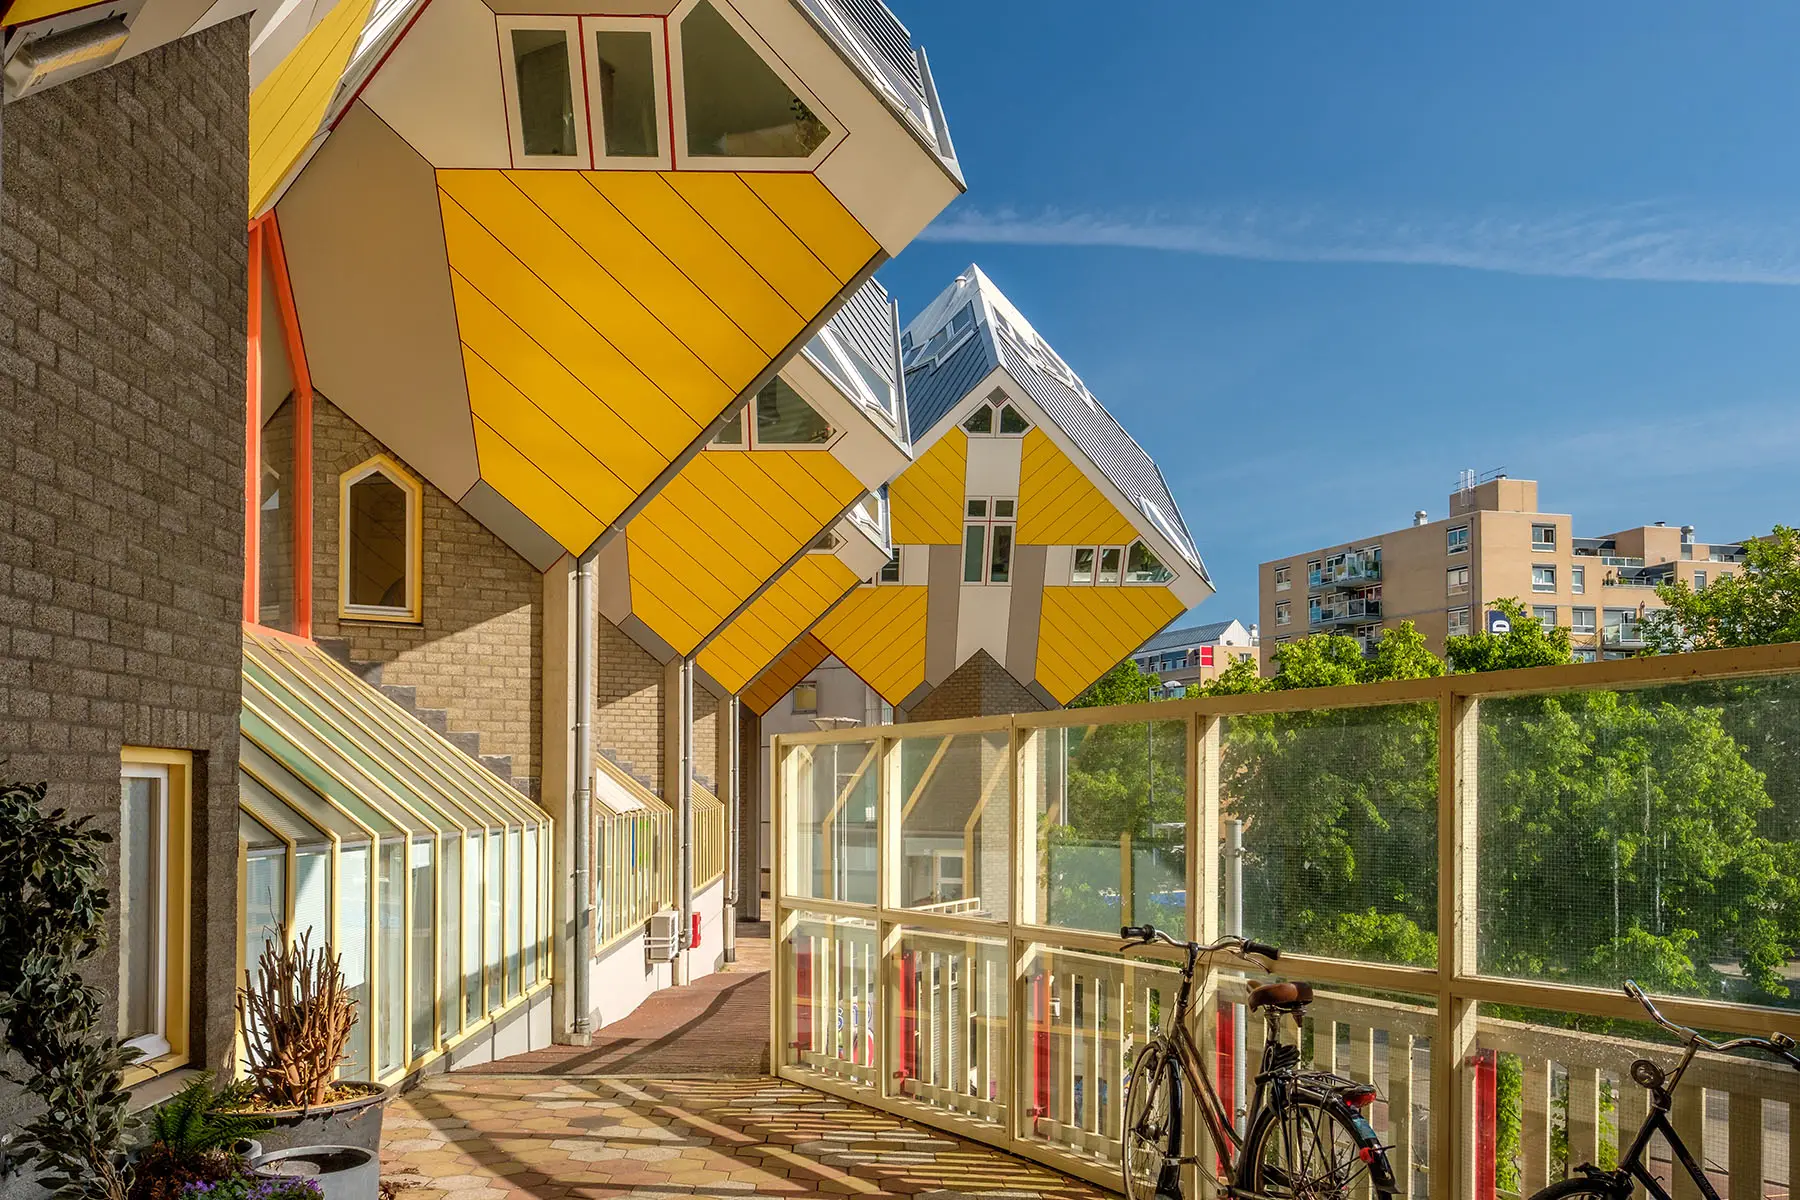 The yellow Cube houses in Rotterdam, the Netherlands.